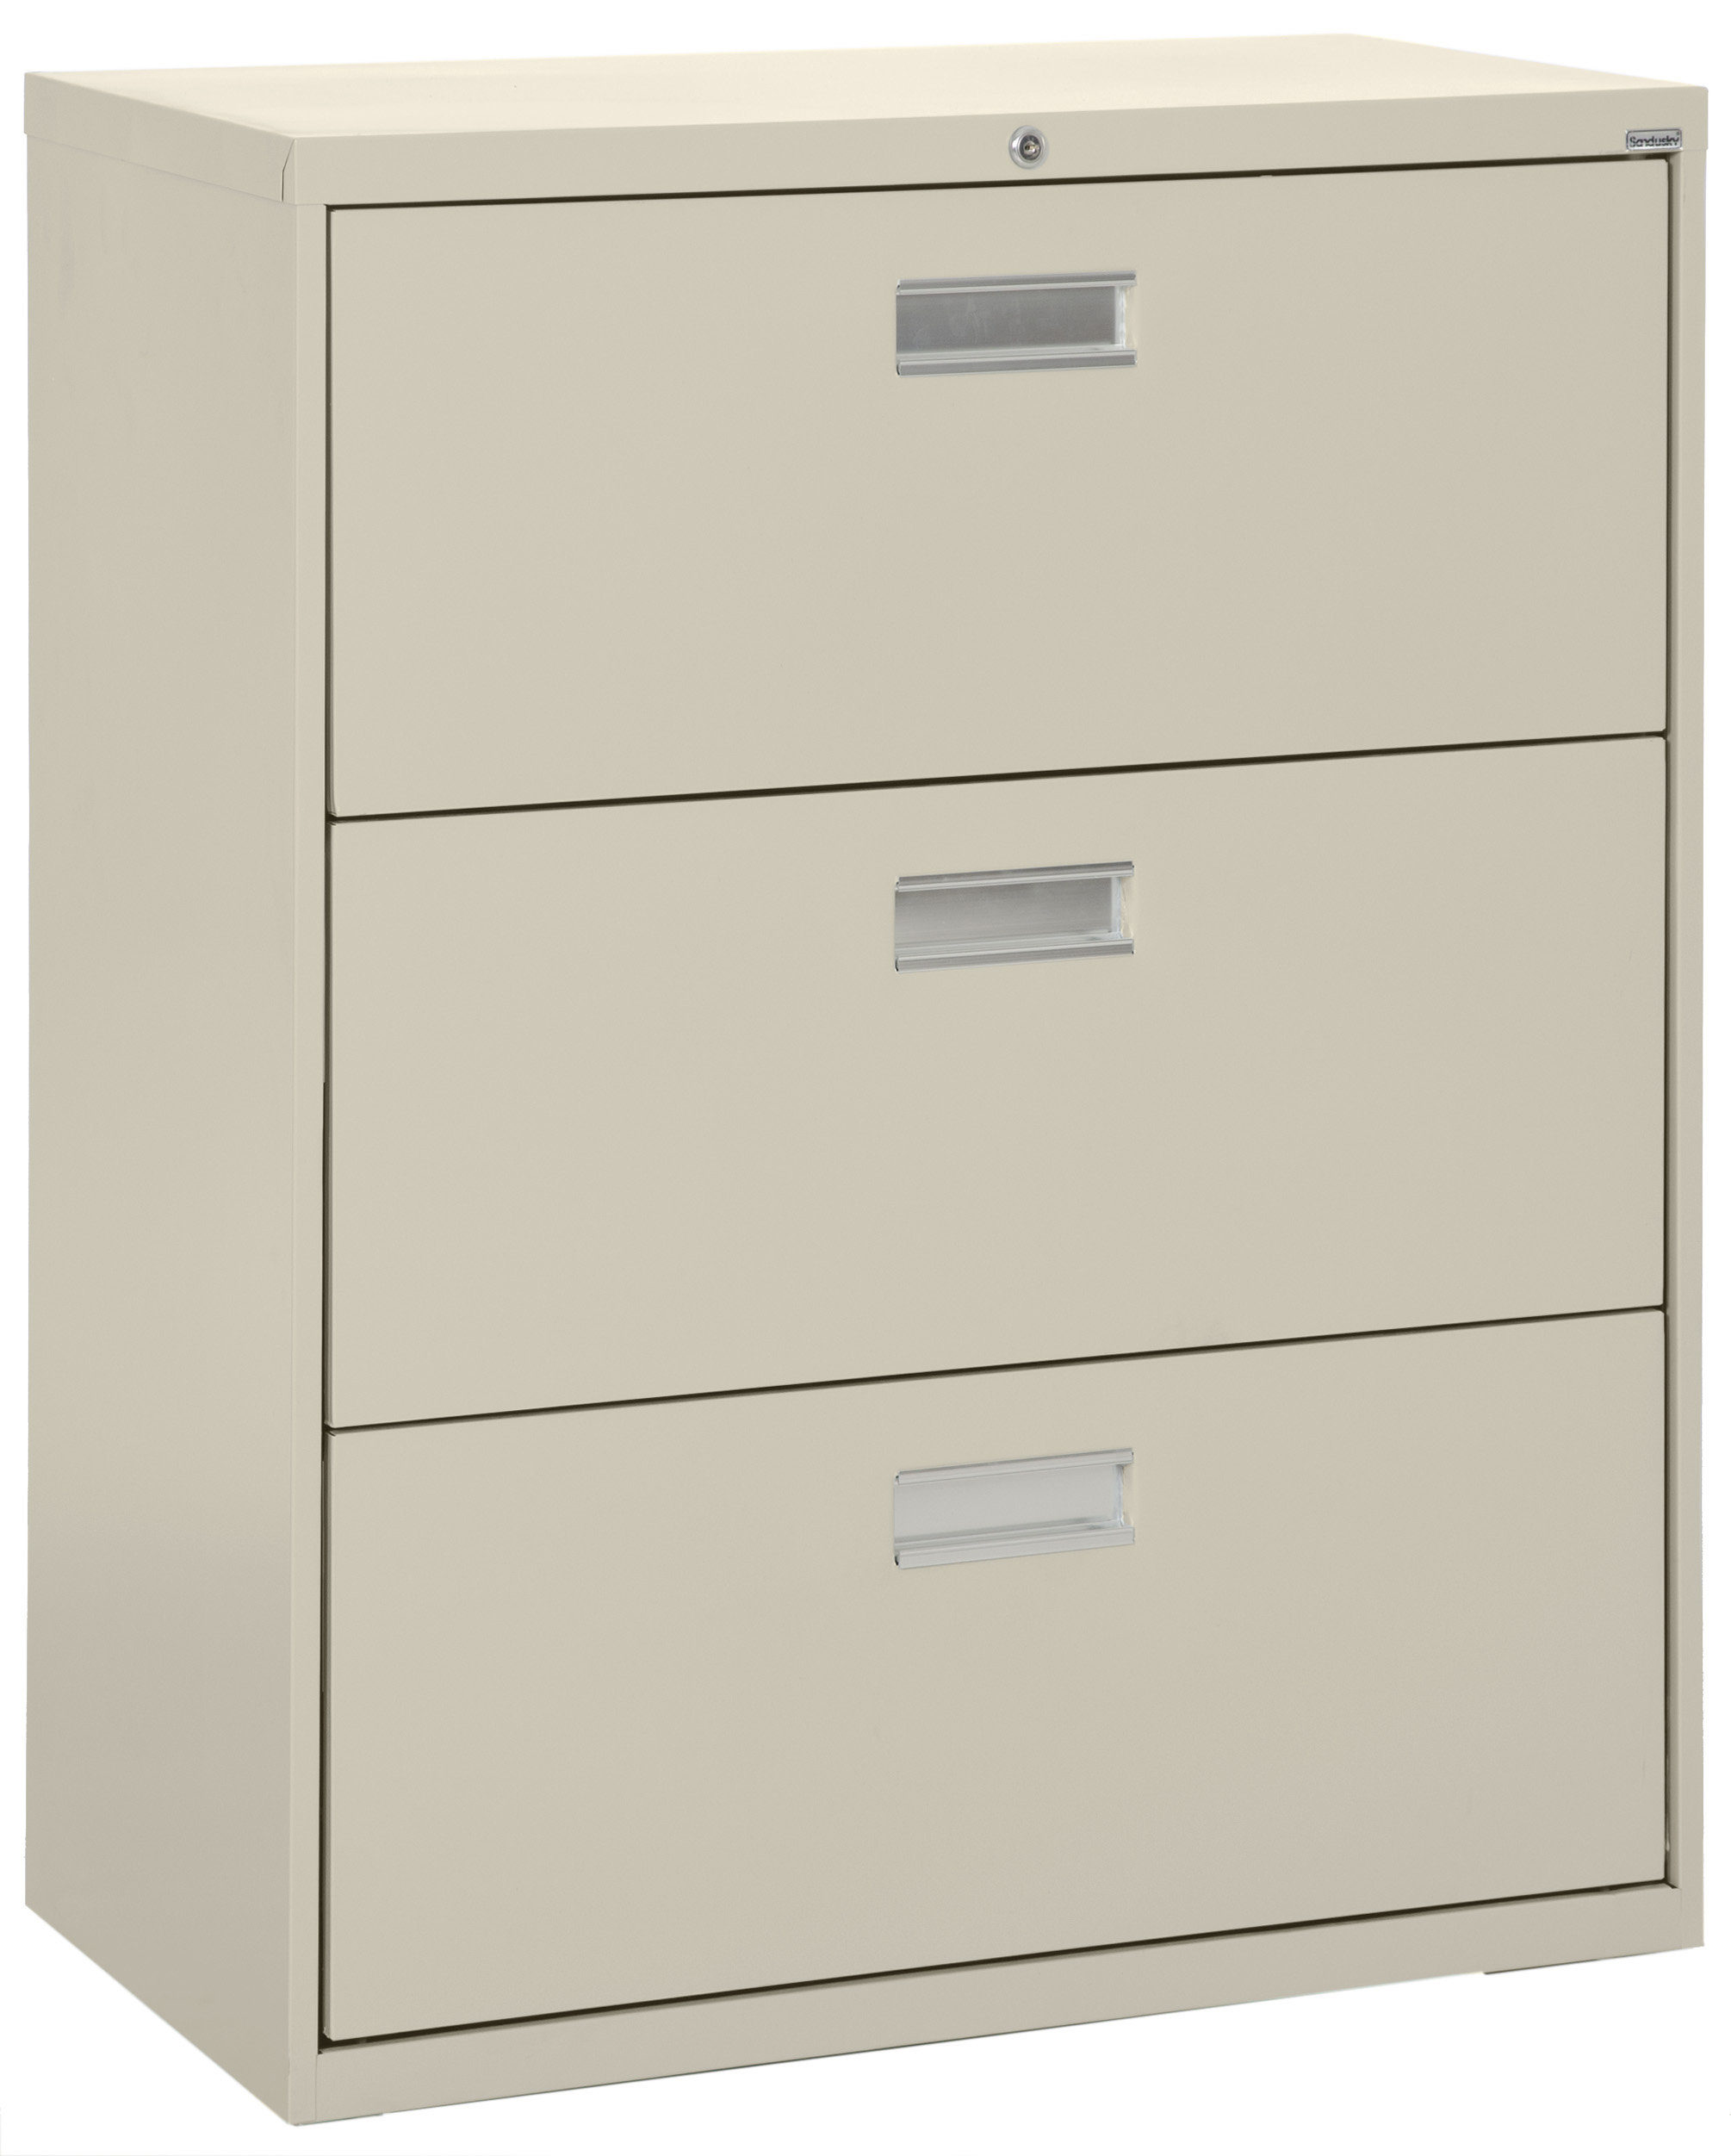 3 Drawer Lateral Filing Cabinet Reviews Joss Main with sizing 2010 X 2503